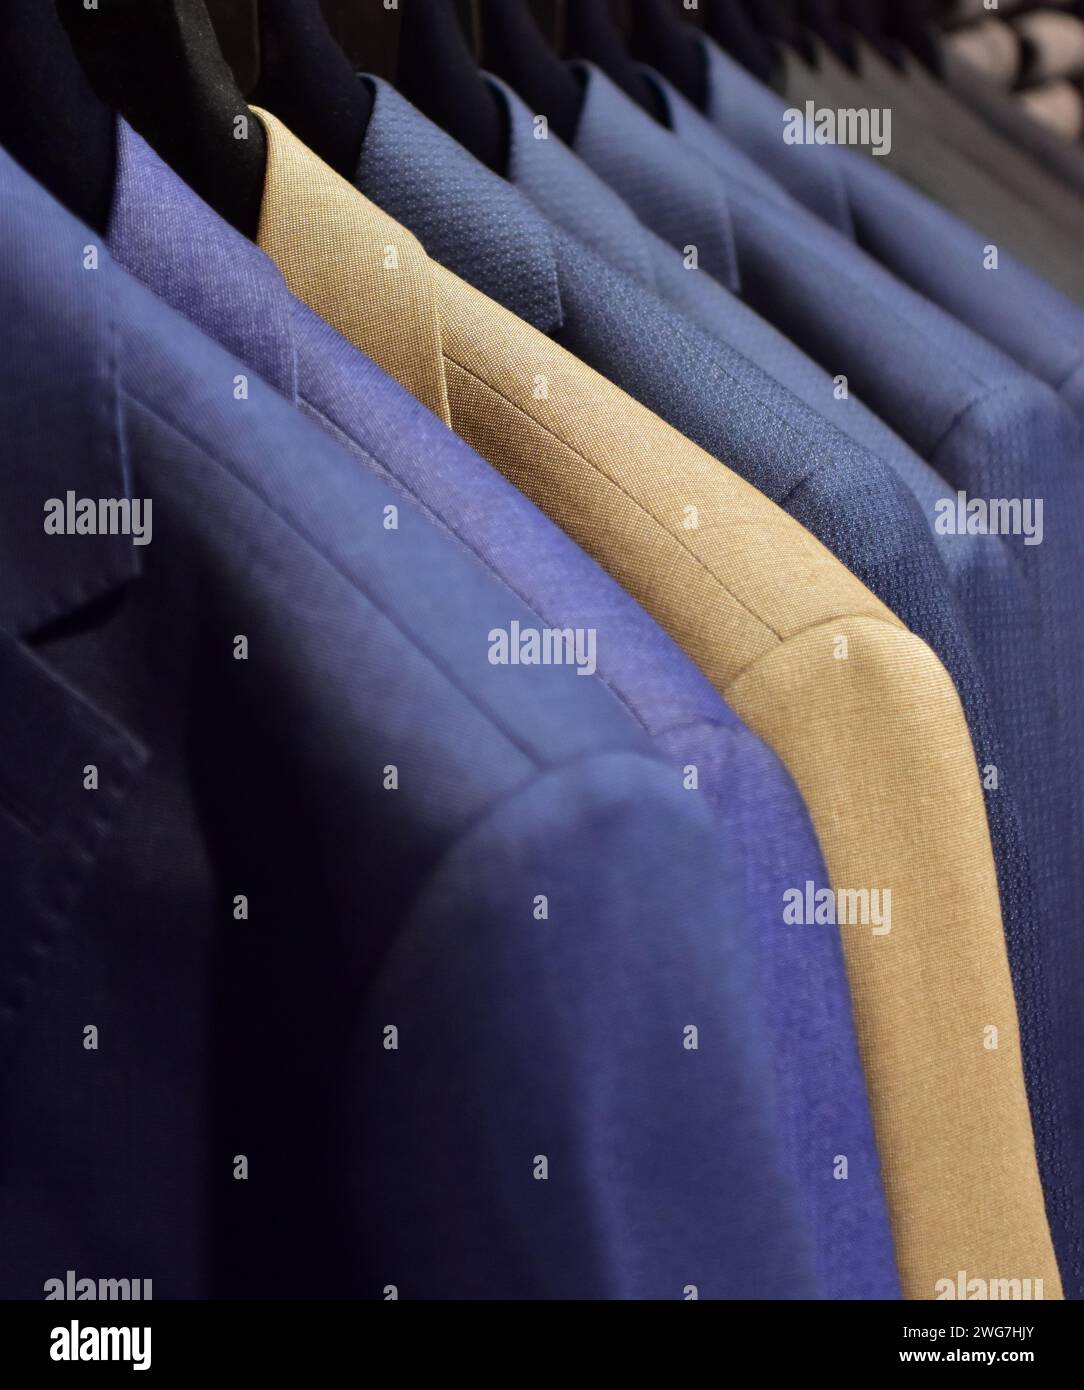 Suits on a clothing hanger in a boutique. Stock Photo